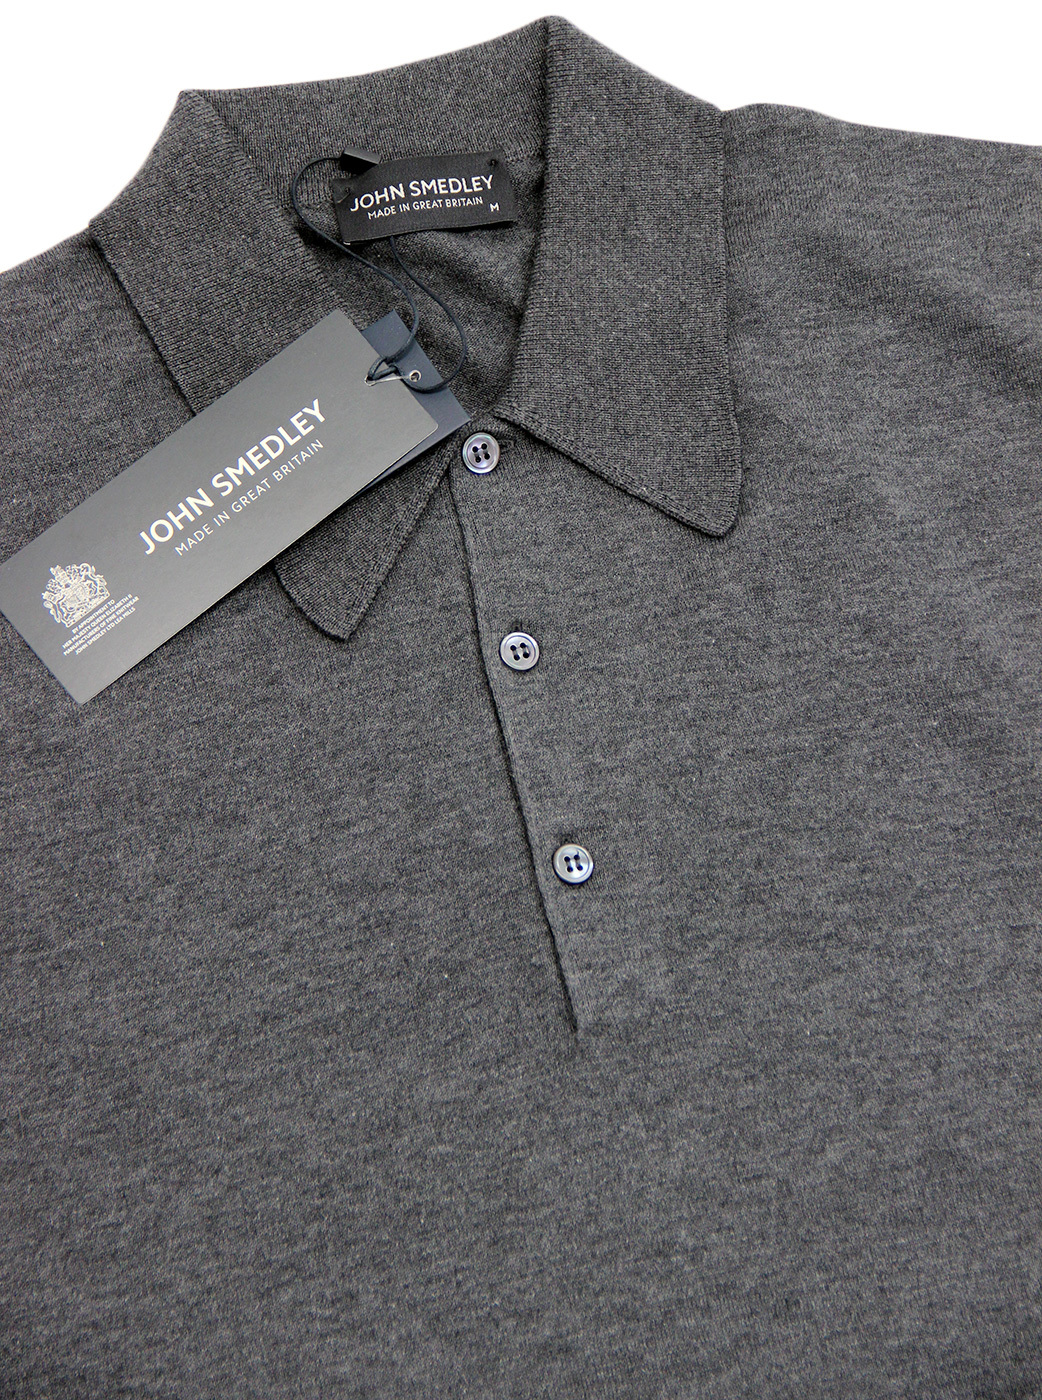 JOHN SMEDLEY Isis Retro 60s Mod Classic Fit Knit Polo in Charcoal